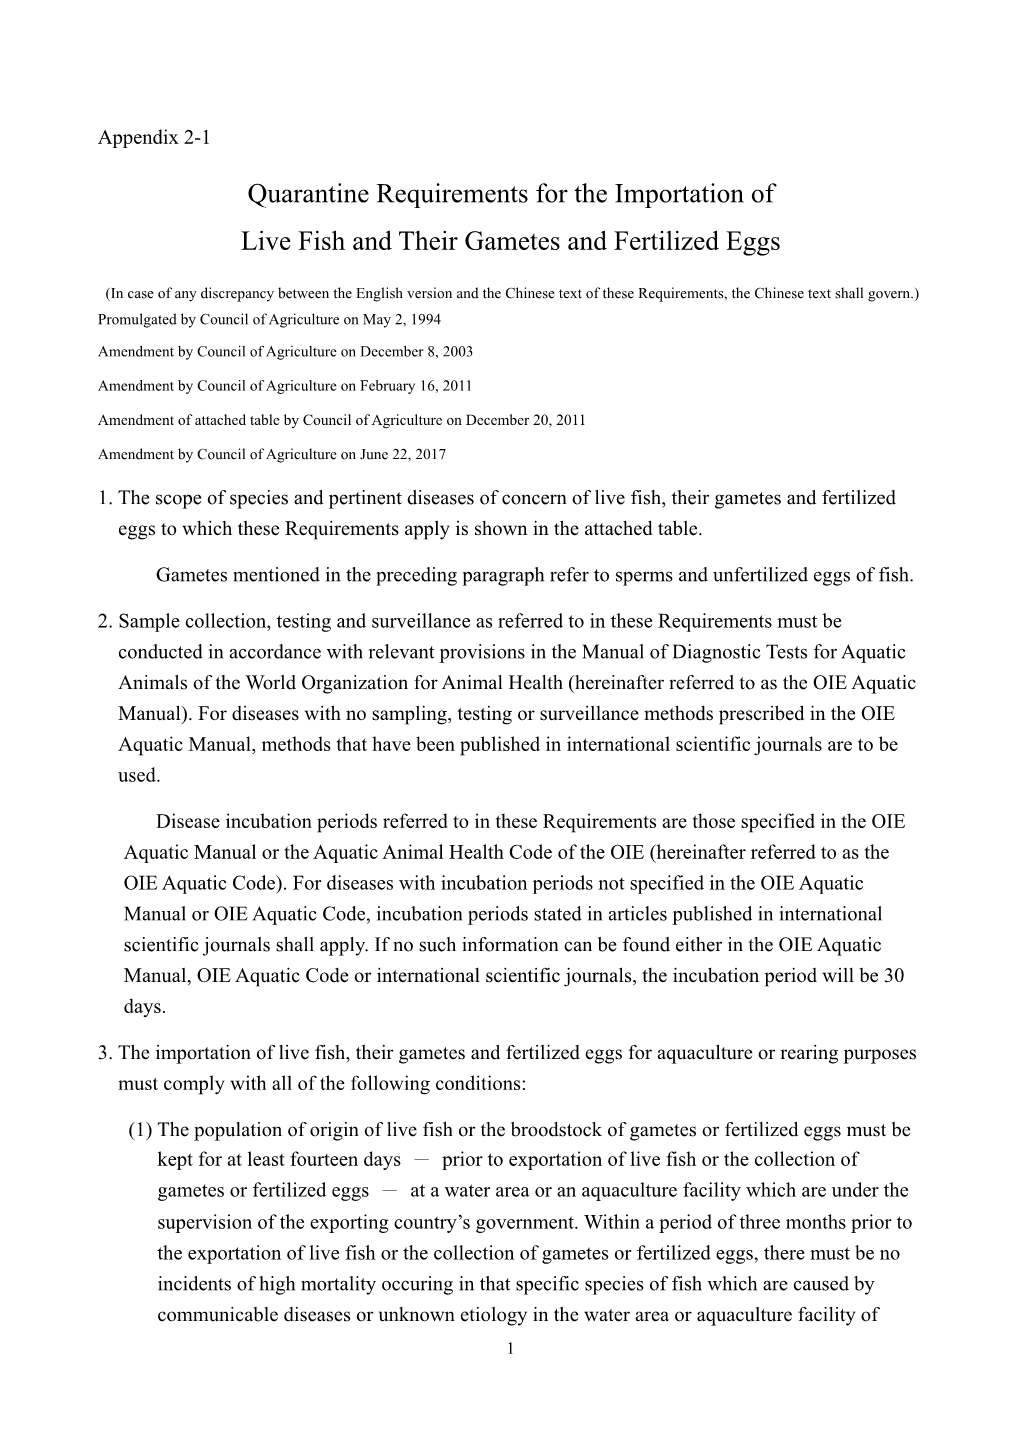 Quarantine Requirements for the Importation of Live Fish and Their Gametes and Fertilized Eggs